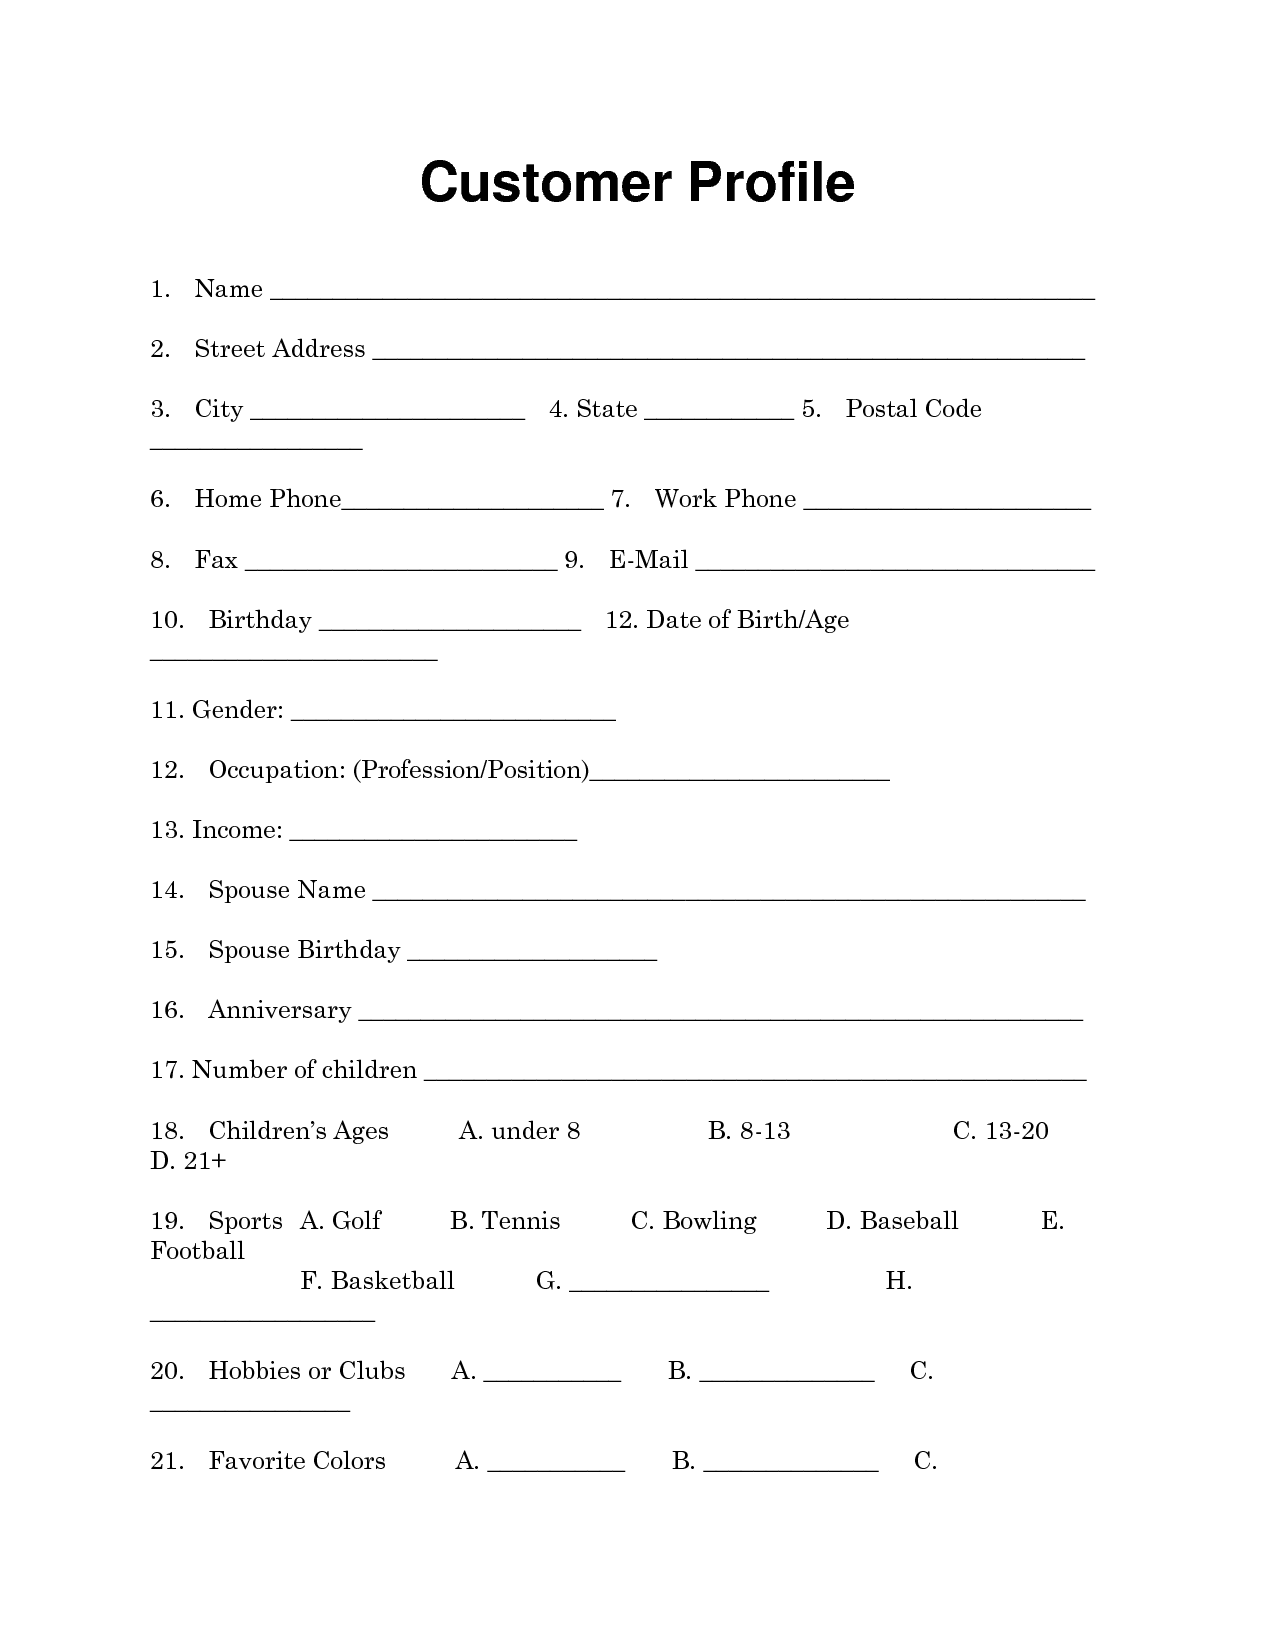 client profile template word   Boat.jeremyeaton.co